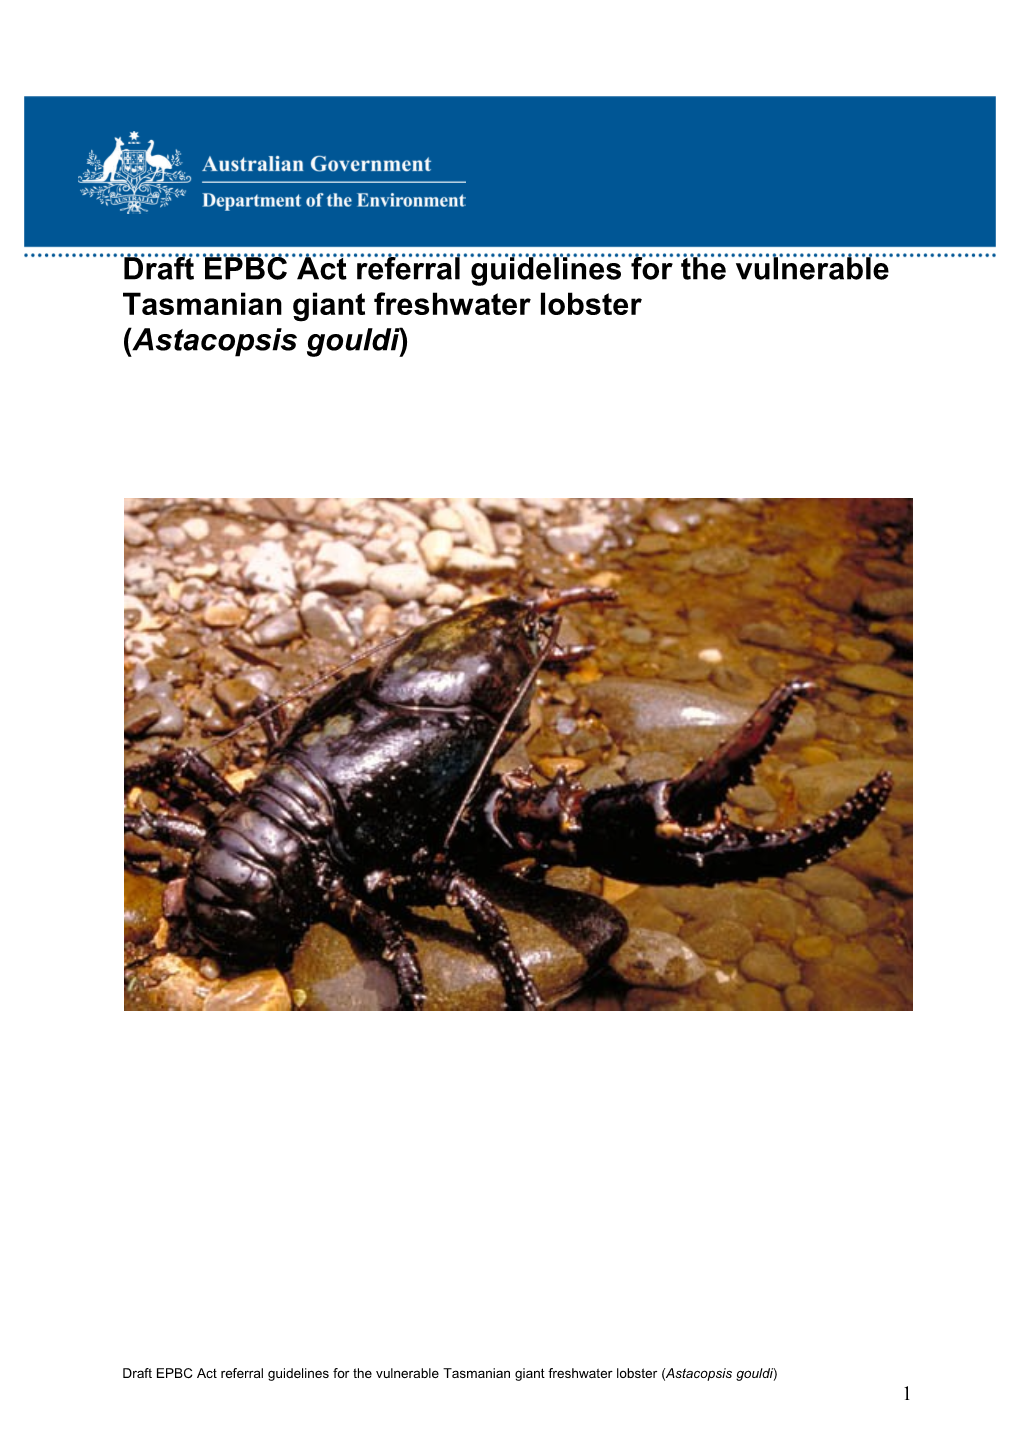 Draft EPBC Act Referral Guidelines for the Vulnerable Tasmanian Giant Freshwater Lobster